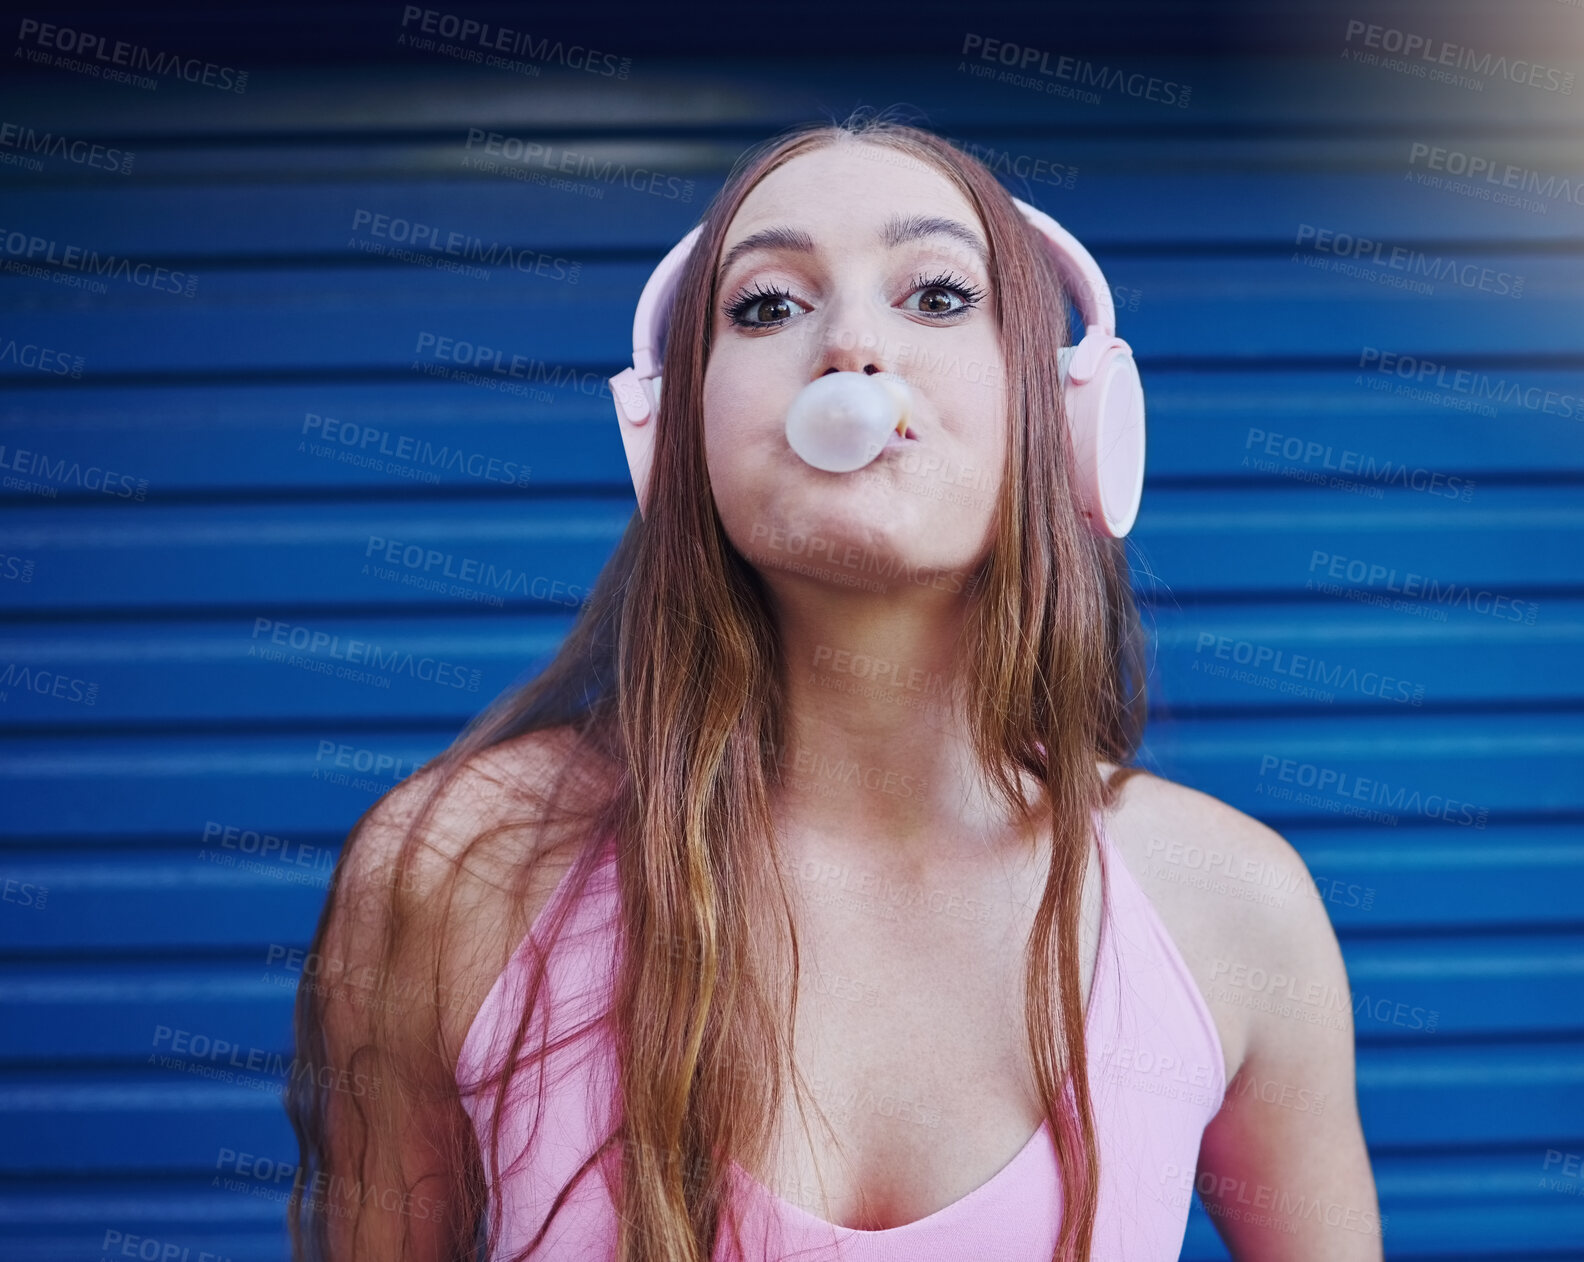 Buy stock photo Young woman, bubblegum and headphones, face isolated on blue background, listen to music with freedom and fashion. Blowing bubble, candy and crazy gen z youth in studio, fun with radio or audio tech